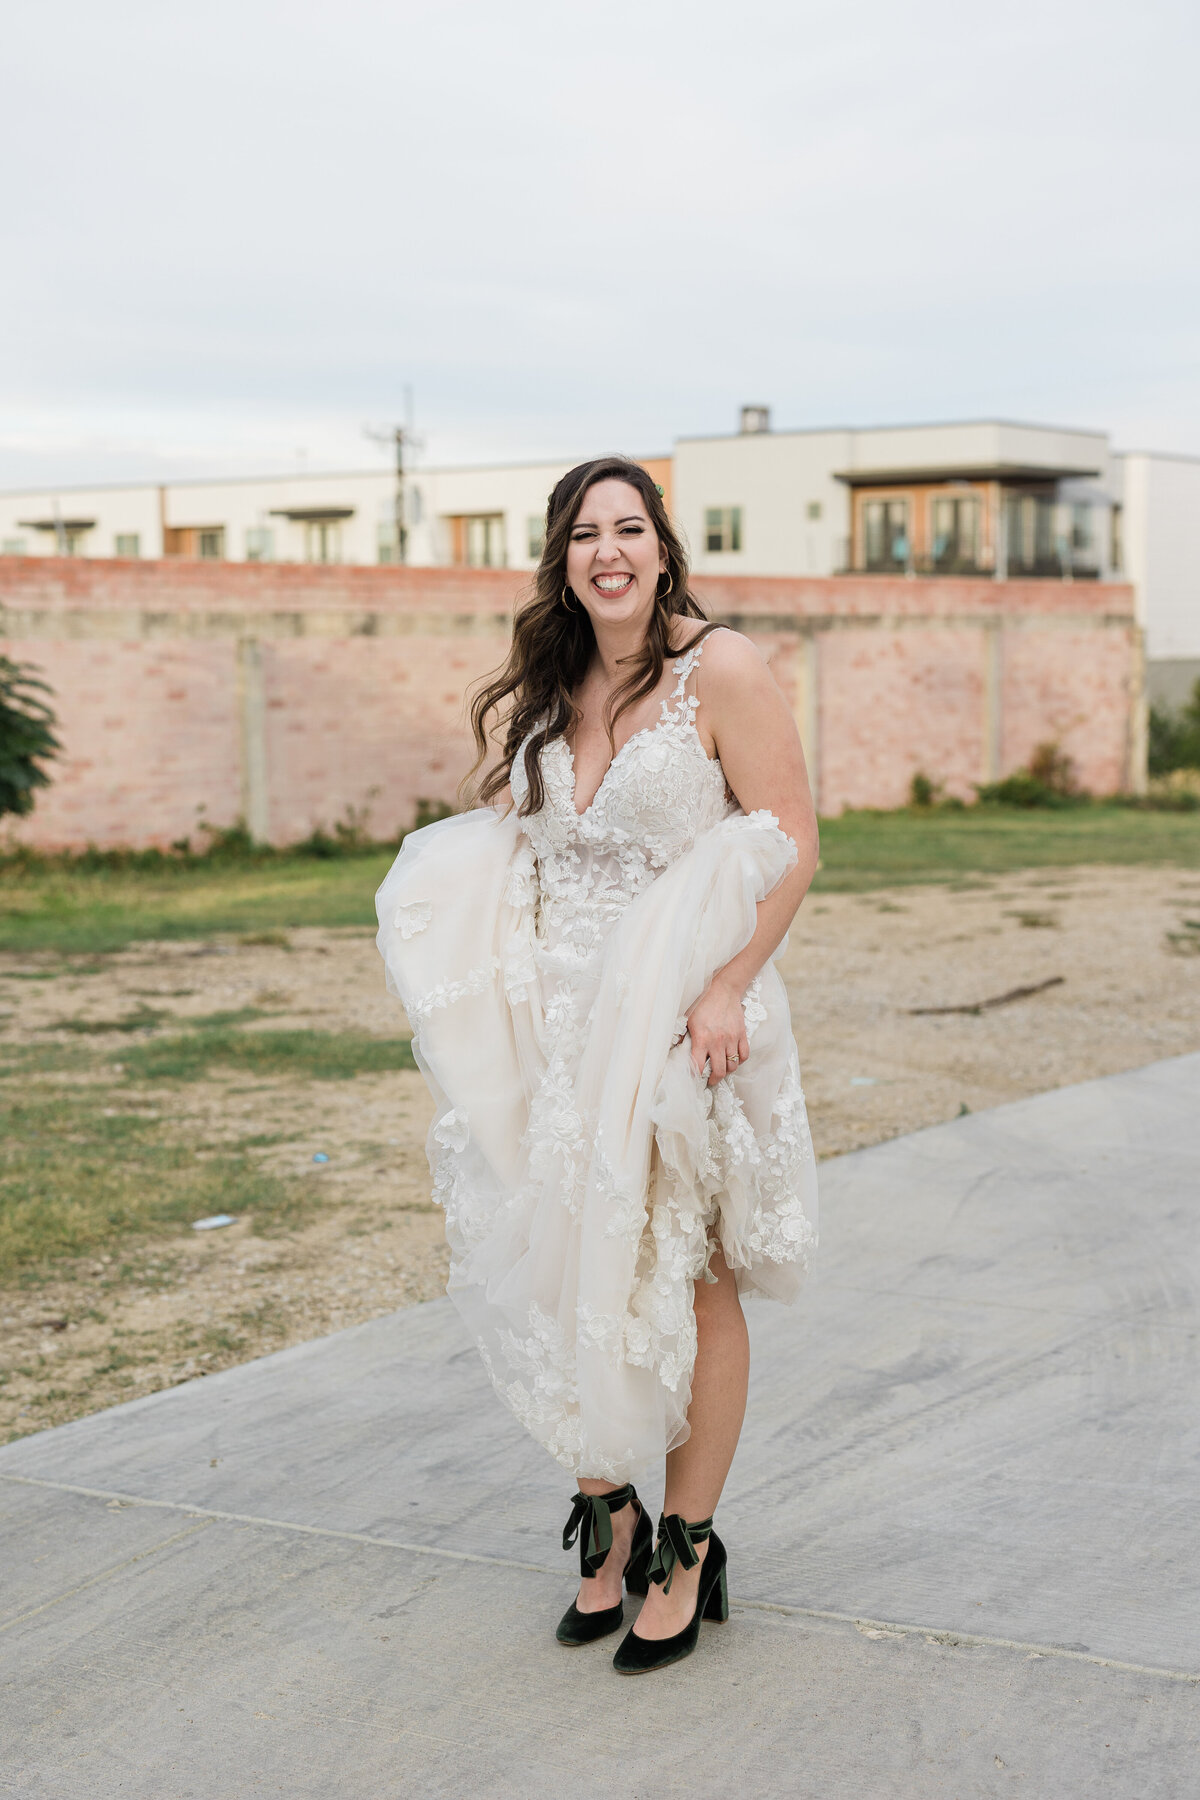 Portrait of a bride lifting up her wedding dress to show off her shoes while smiling fully after her wedding ceremony at The 4 Eleven in Fort Worth Texas. The dress is sleeveless, intricate, white, and long while the shoes are high heel, velvet, and green.